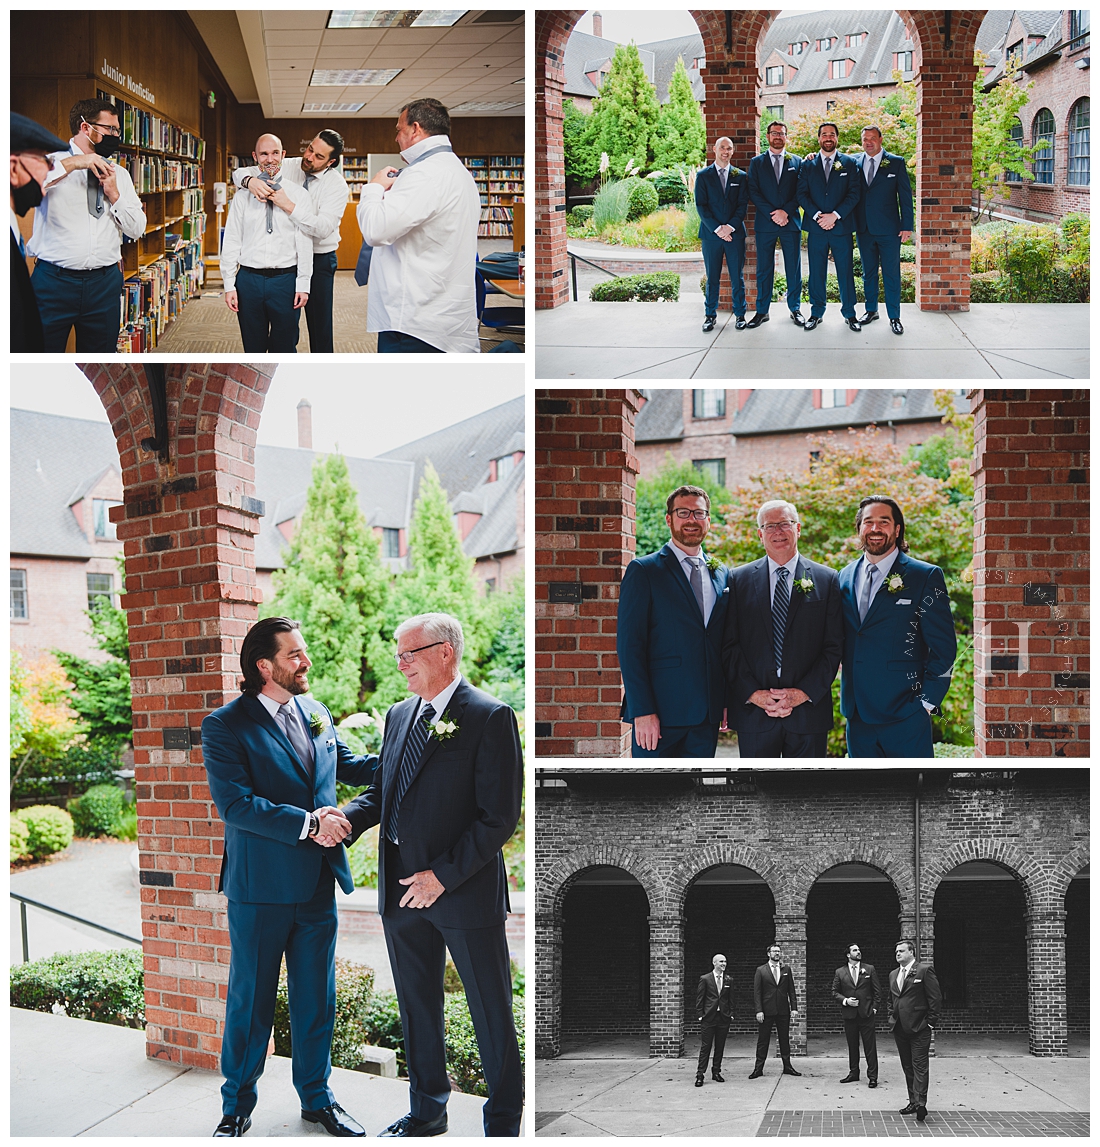 Pre-Wedding Groomsmen Moments | Groom Wedding Prep, Photographs for Grooms-to-be | Photographed by the Best Tacoma Wedding Photographer Amanda Howse Photography